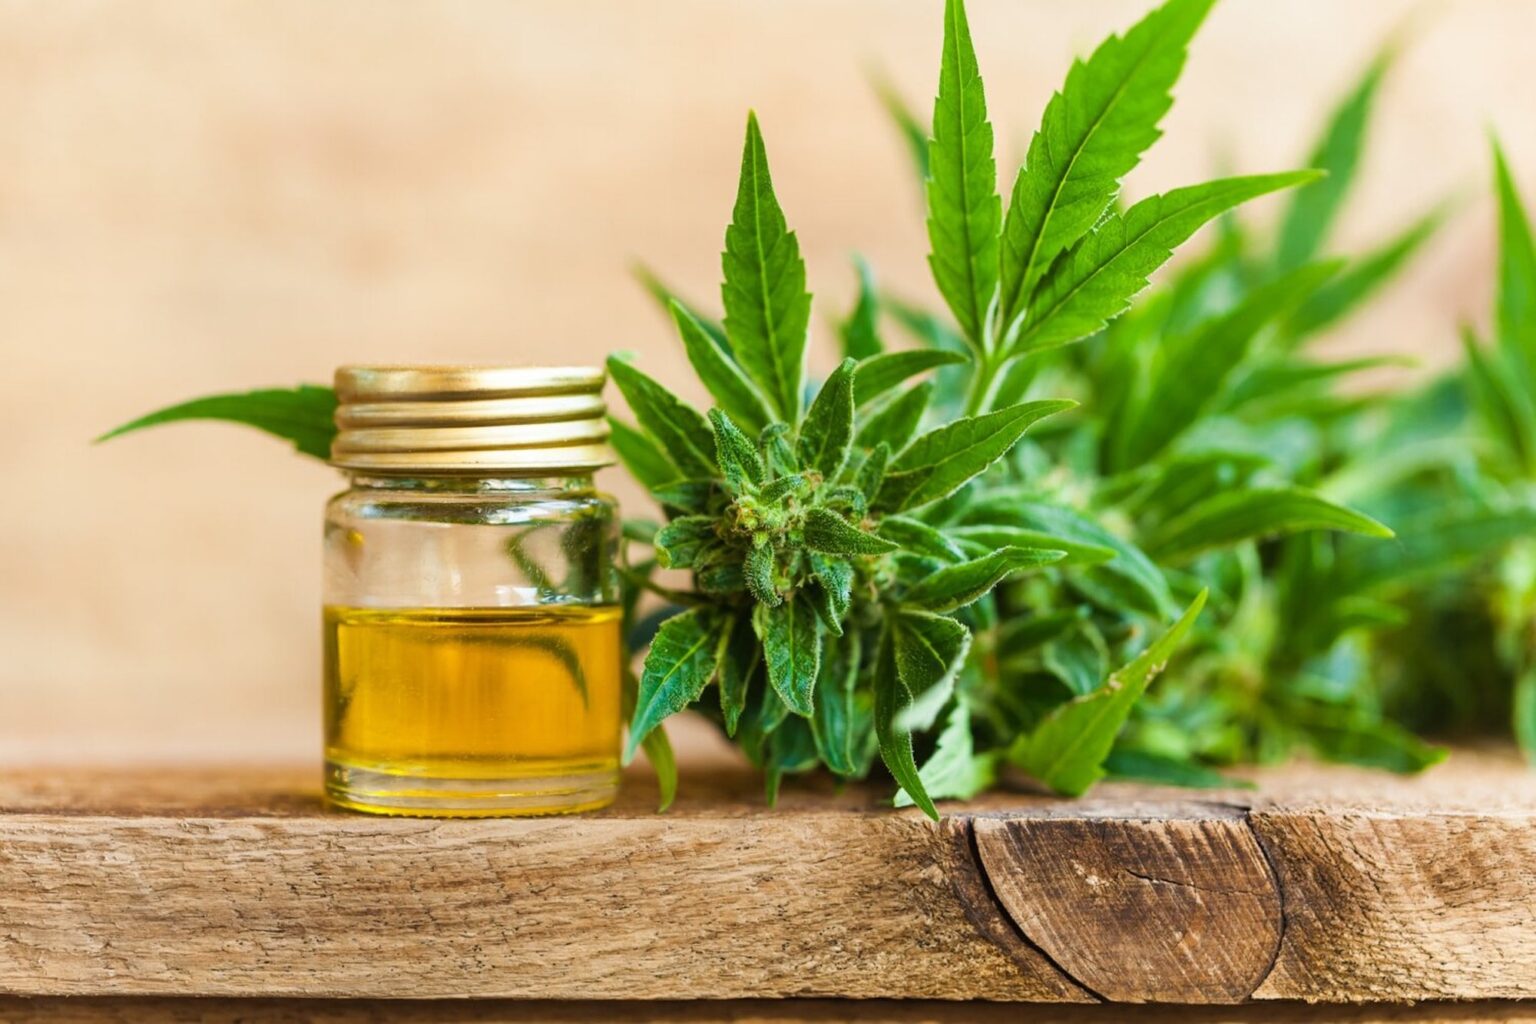 Since hemp was legalized, you're able to buy high-quality CBD oils and other products with countless health benefits. Check out which is right for you!